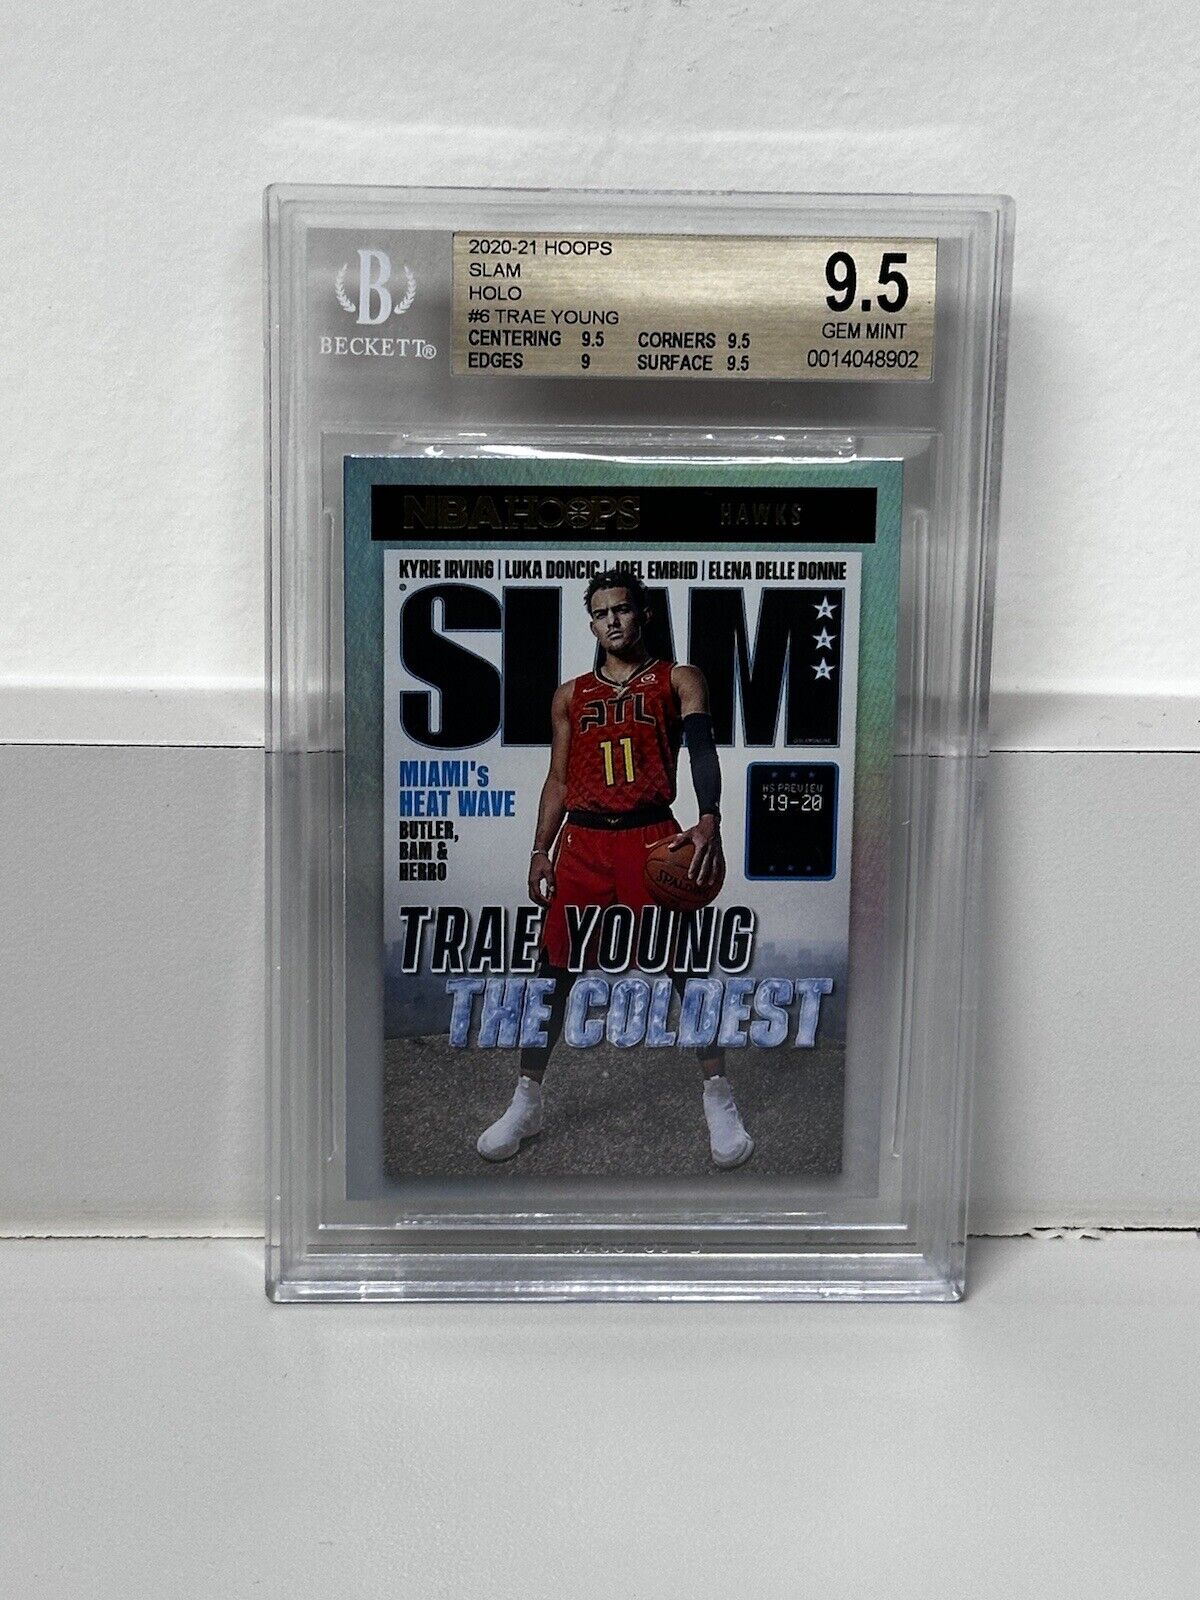 Trae Young 2020-21 Panini Hoops Slam Insert Holo Foil BGS 9.5